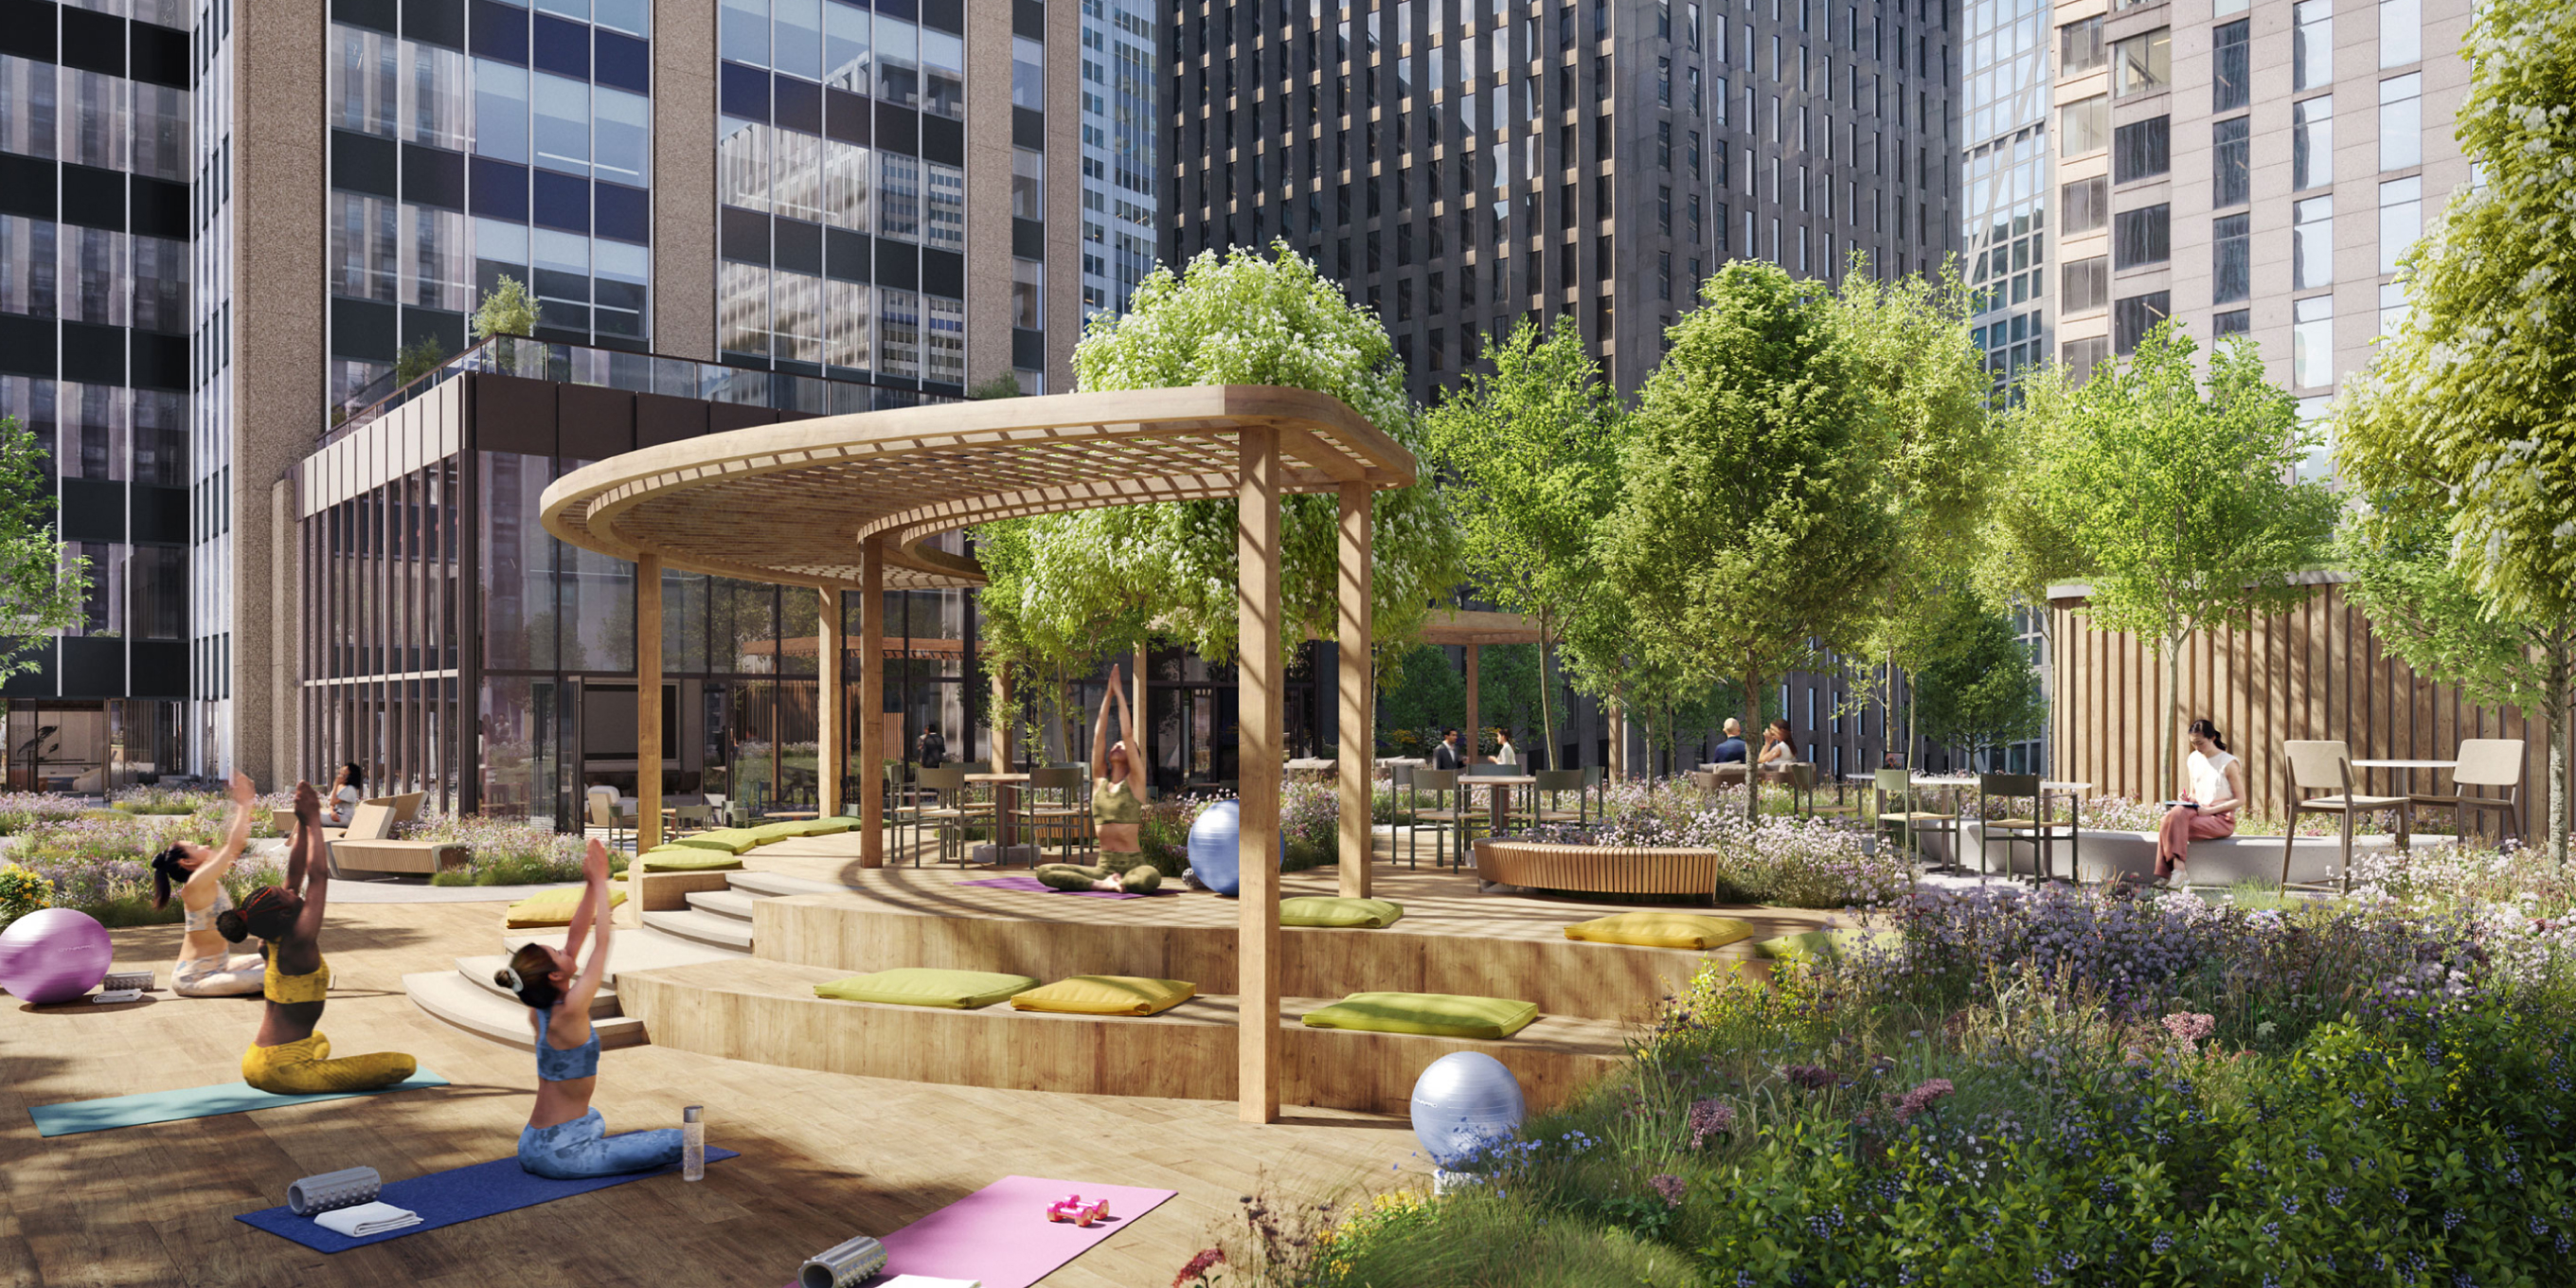 1290 Avenue of the Americas provides an amenity ecosystem for tenants to focus on both work and self-care.